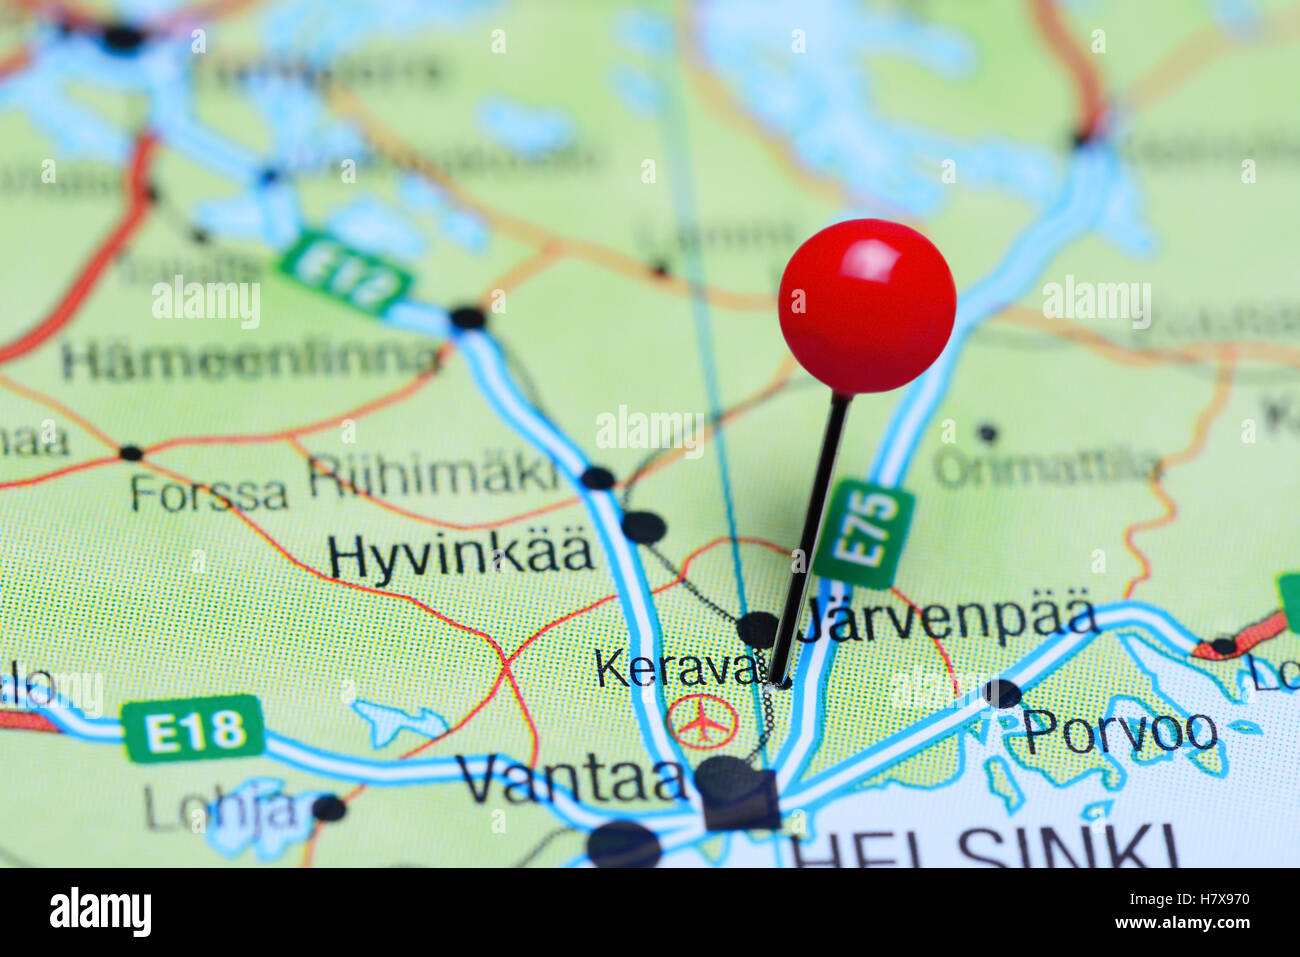 Kerava pinned on a map of Finland Stock Photo